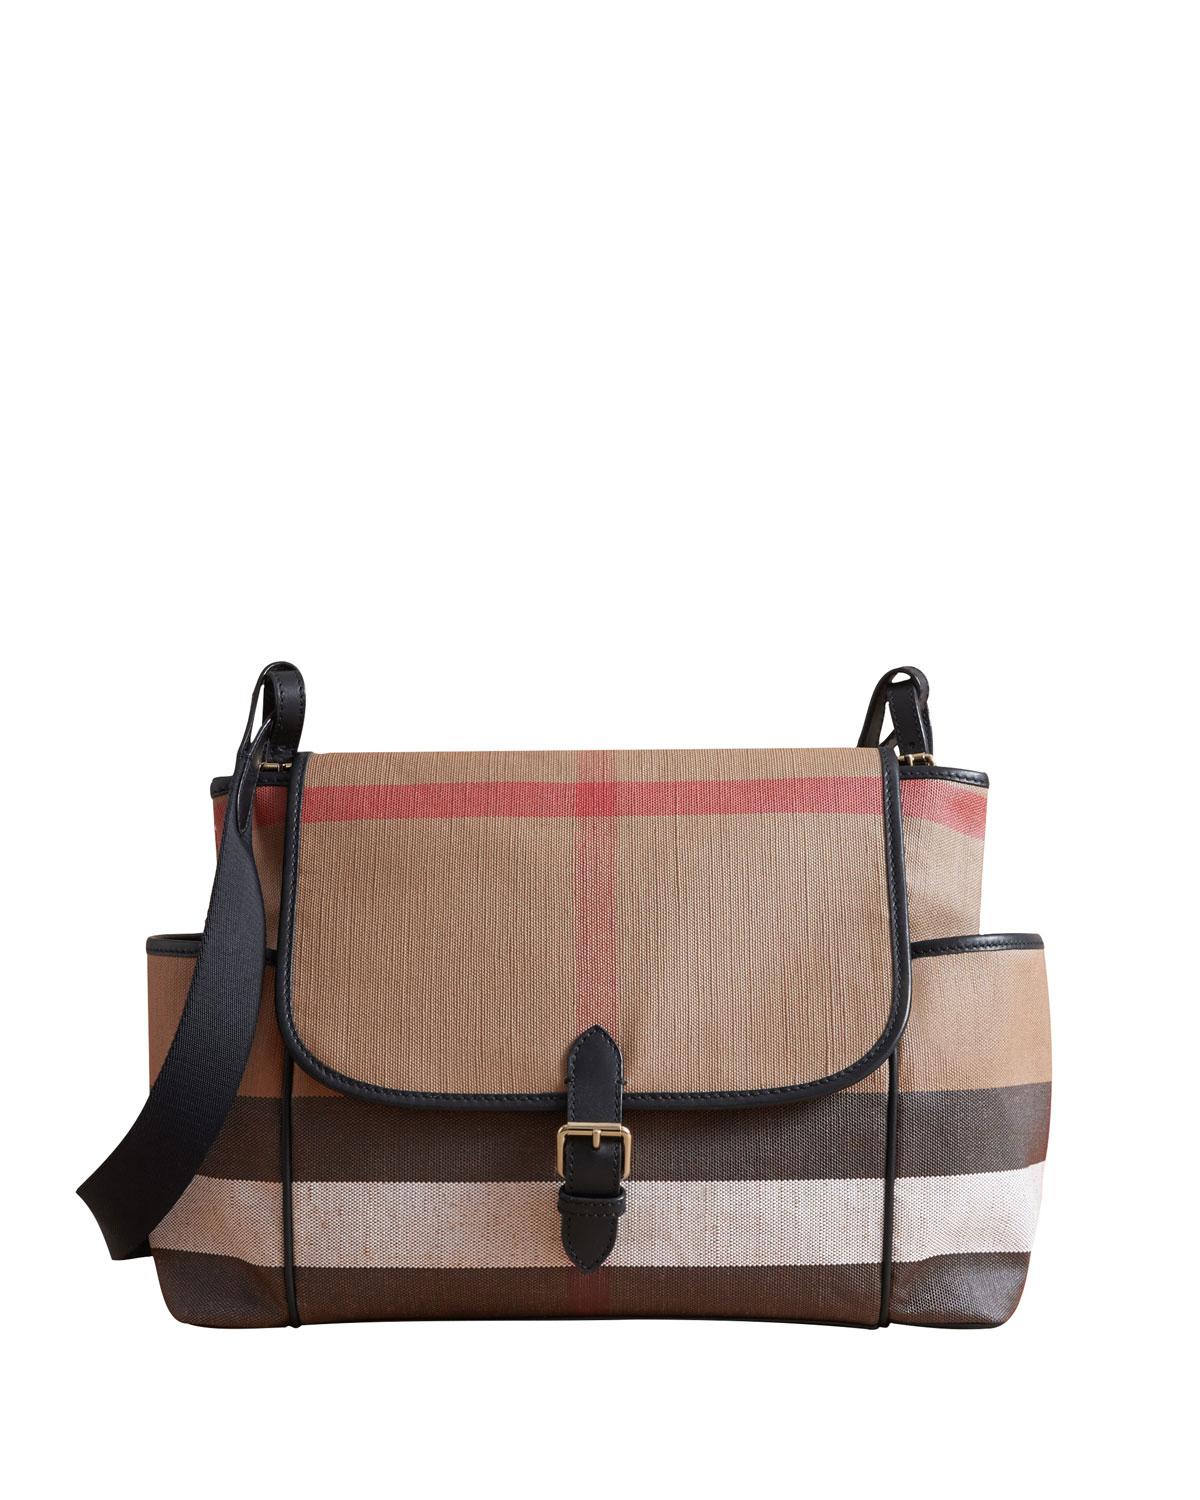 Burberry Flap-top Check Canvas Diaper Bag in Black | Lyst